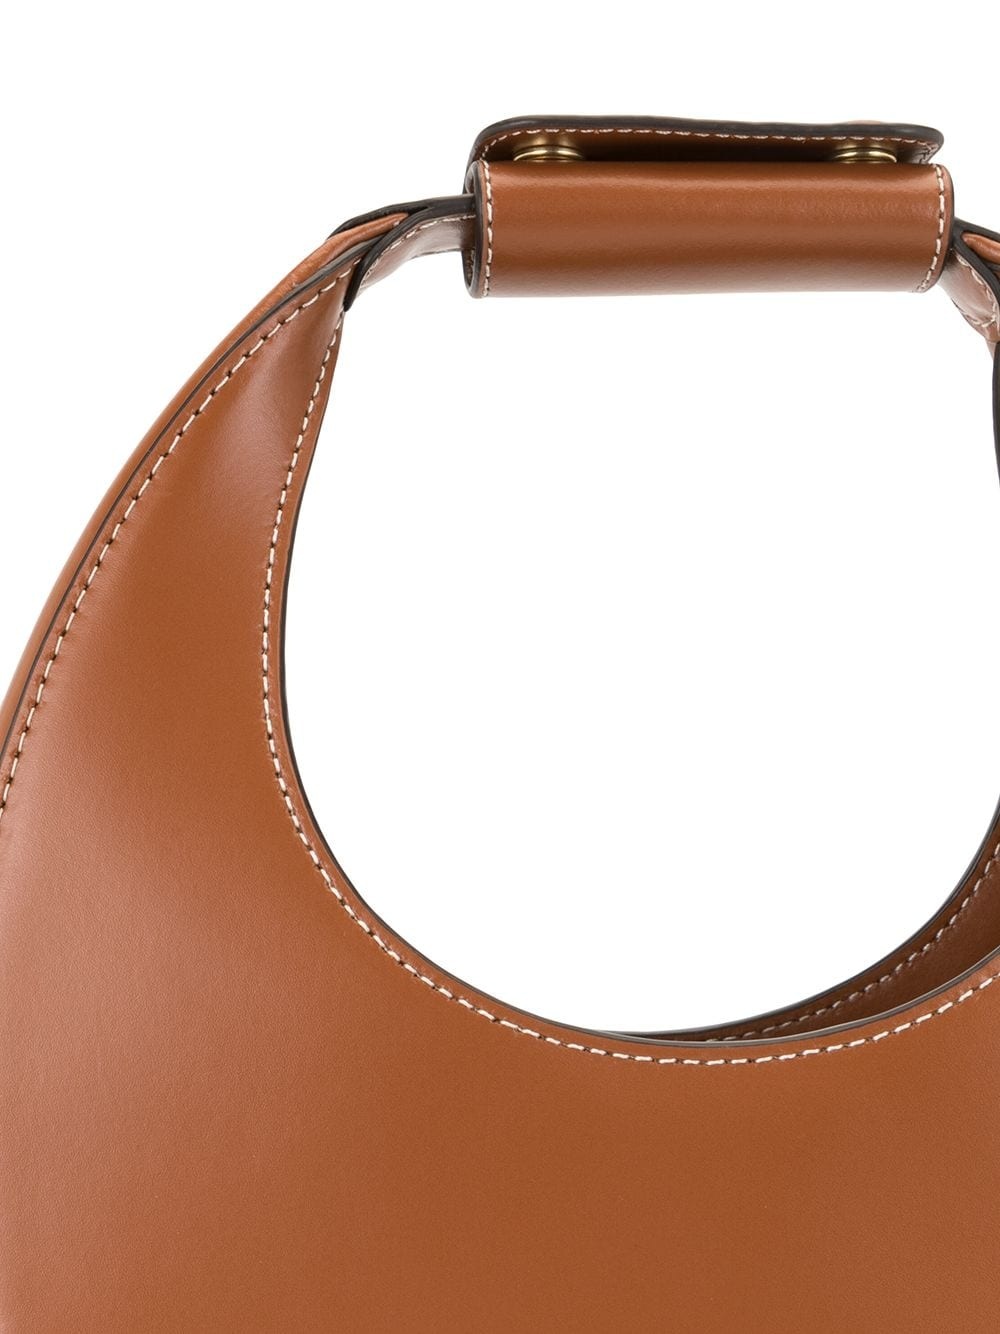 Moon small leather shoulder bag - 4